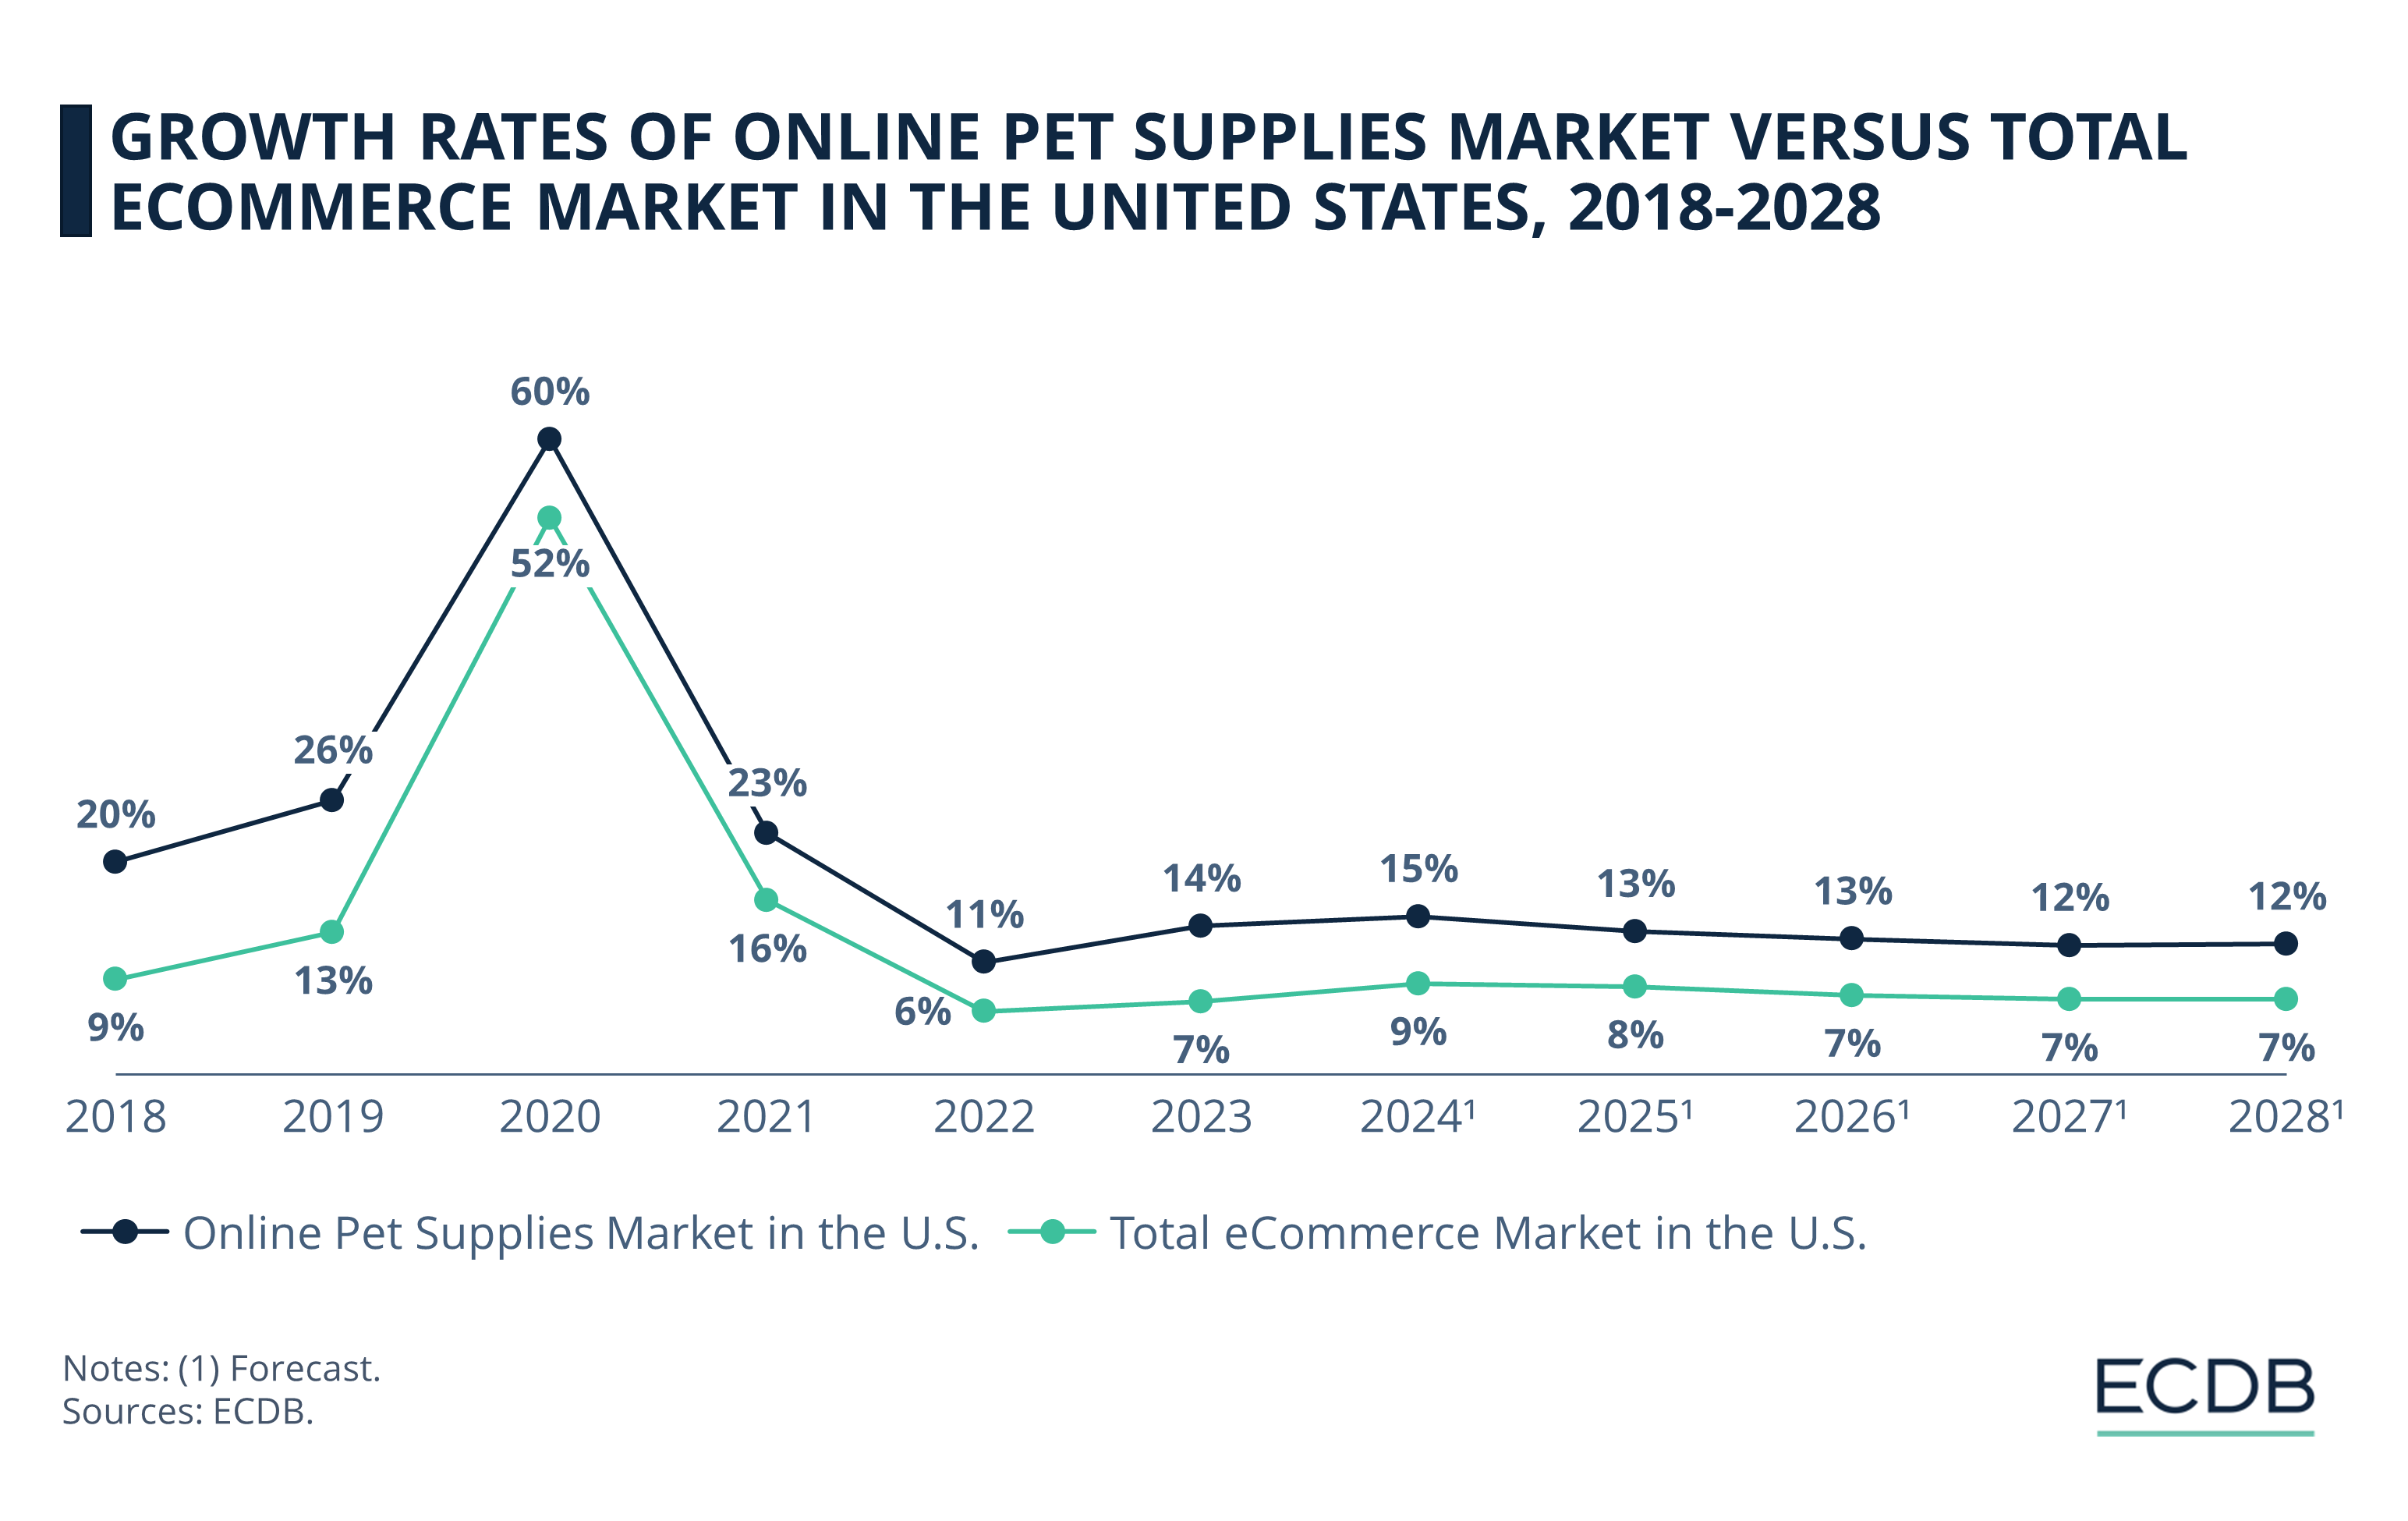 Growth Rates of Online Pet Supplies Market Versus Total eCommerce Market in the United States, 2018-2028